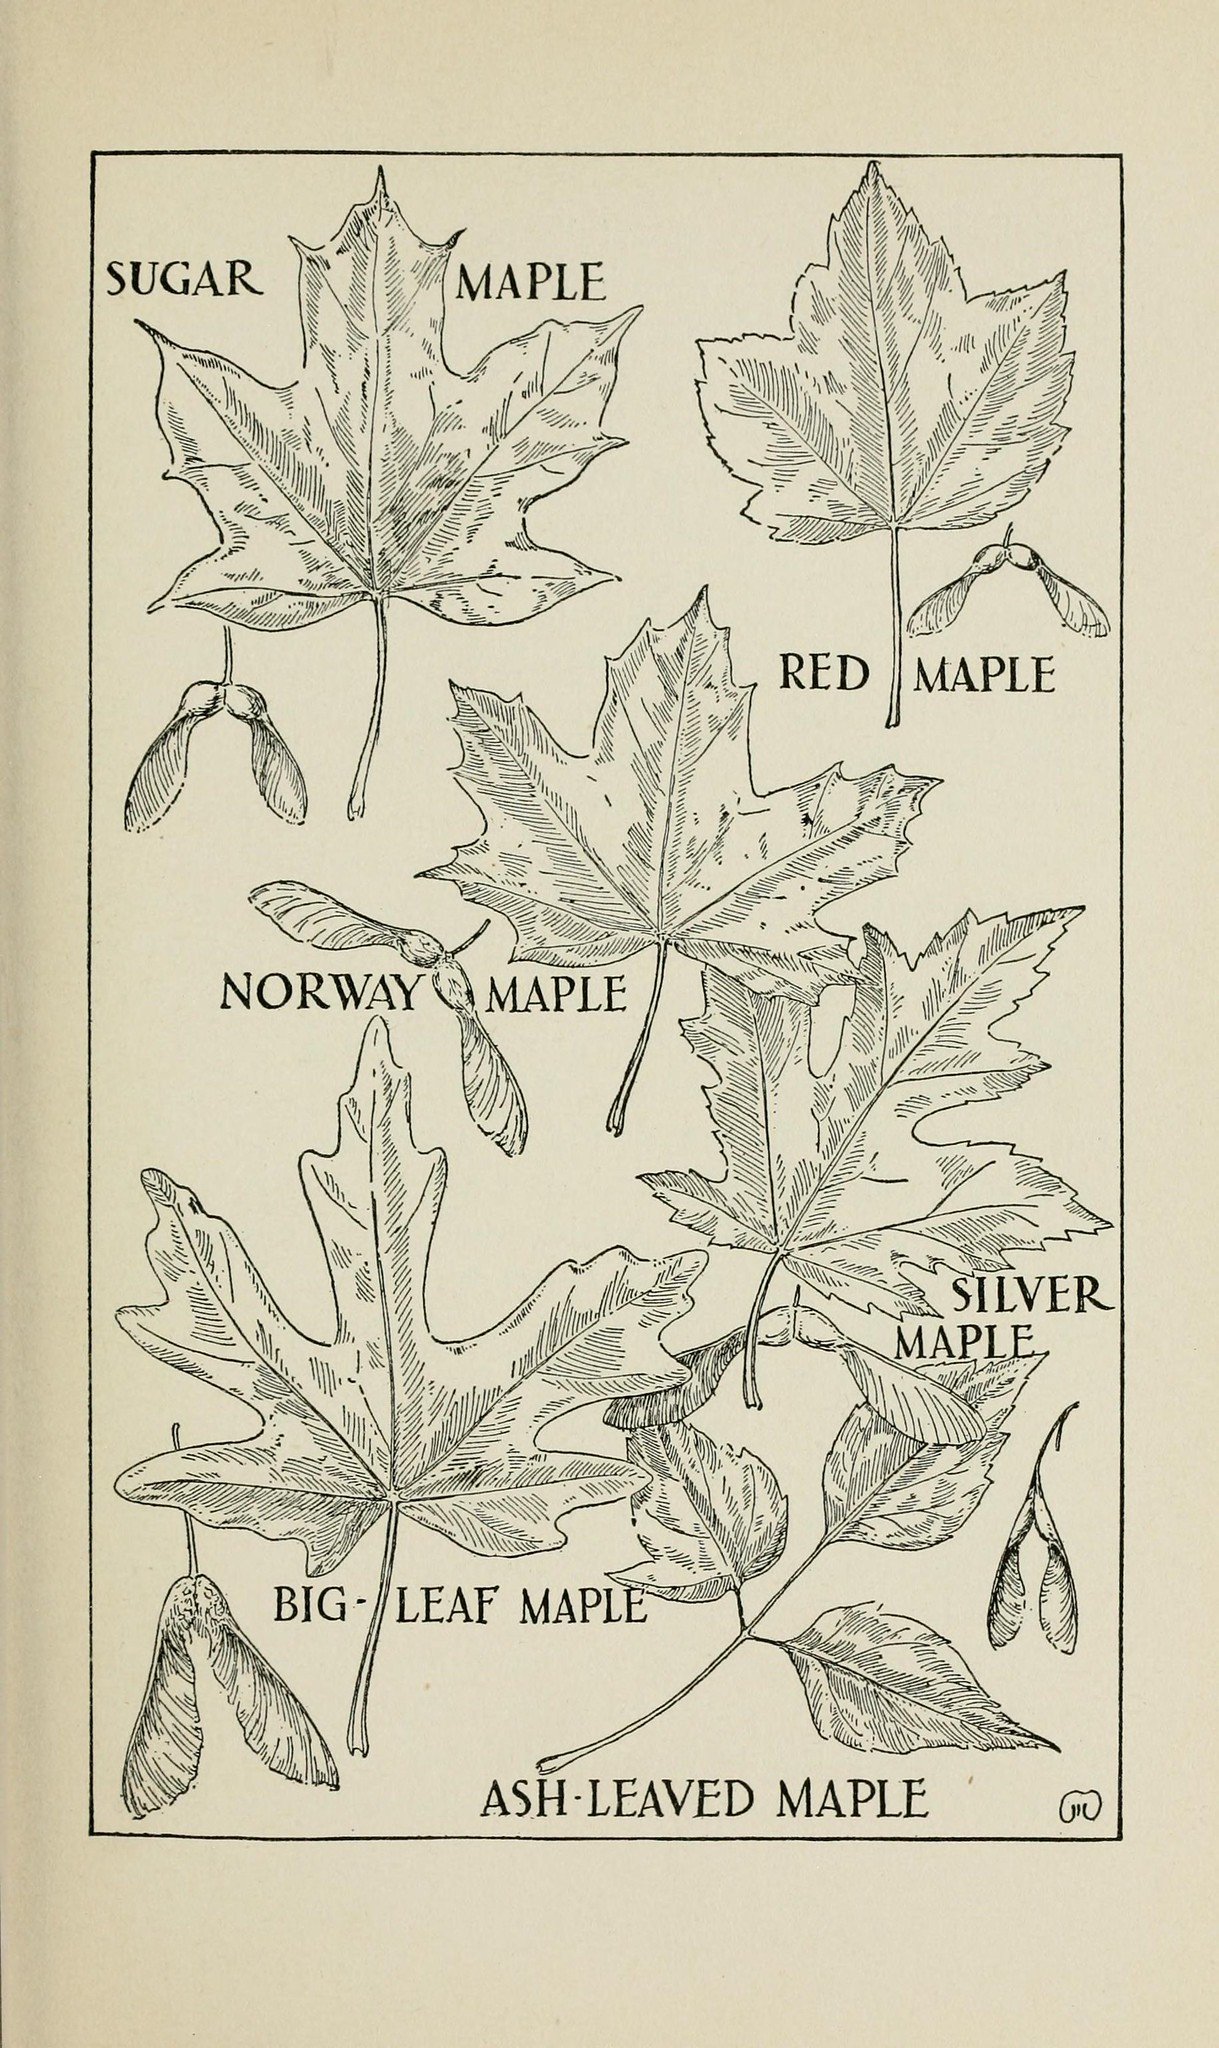 Comparison of Different Maple Leaves